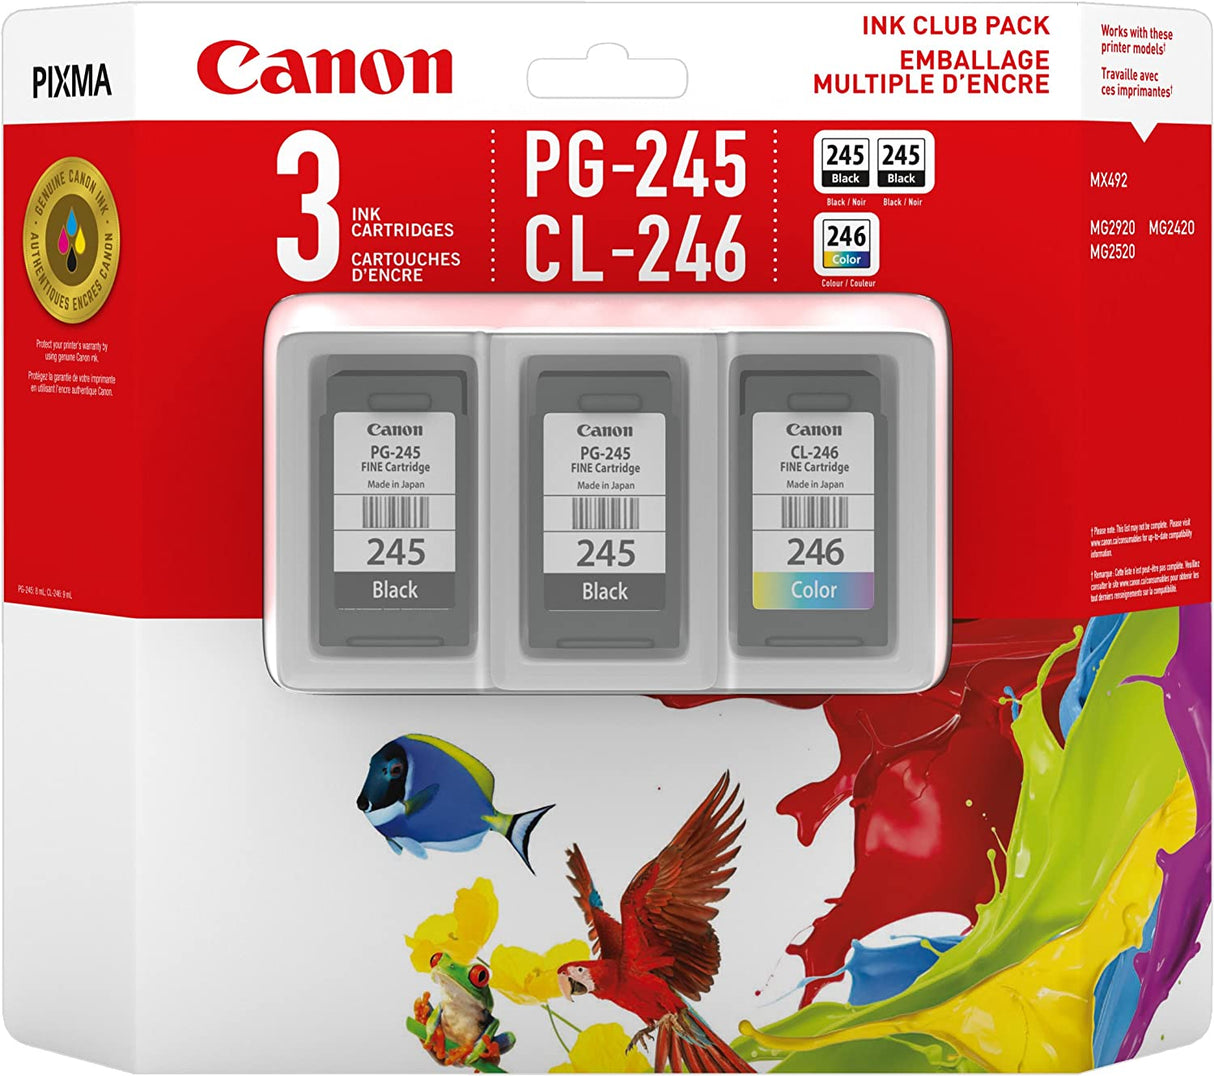 Canon 8279B005 Pg-245 Twin/ Cl-246 Genuine Ink Club Pack Ink Tri-Colour/Black 3 pack Ink